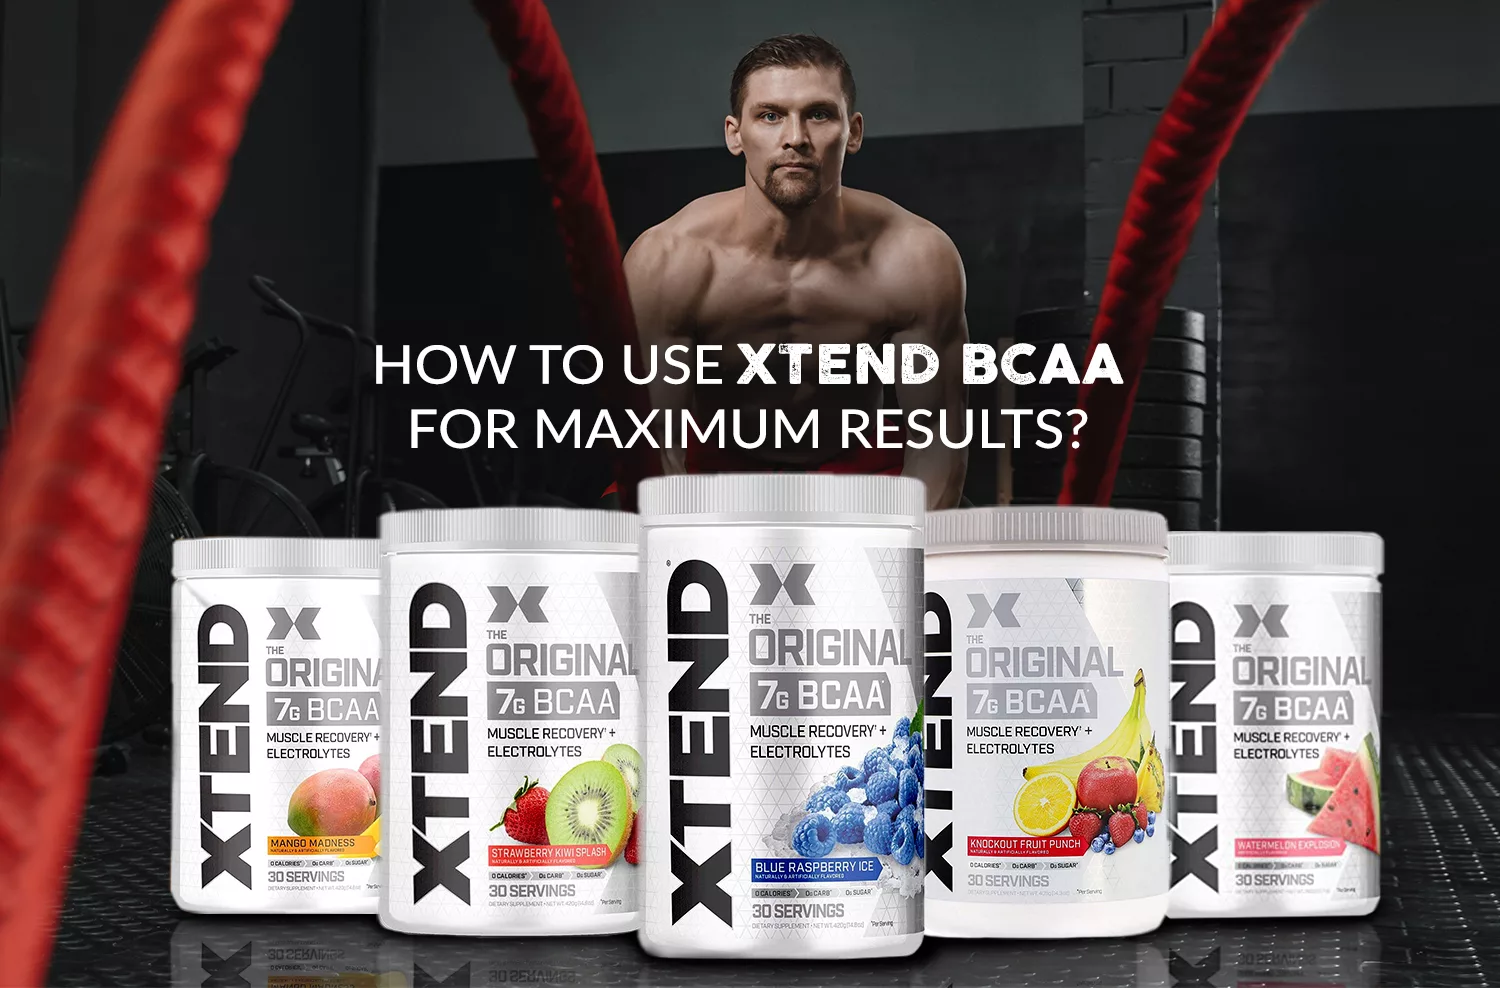 How to Use XTEND BCAA for Maximum Results?